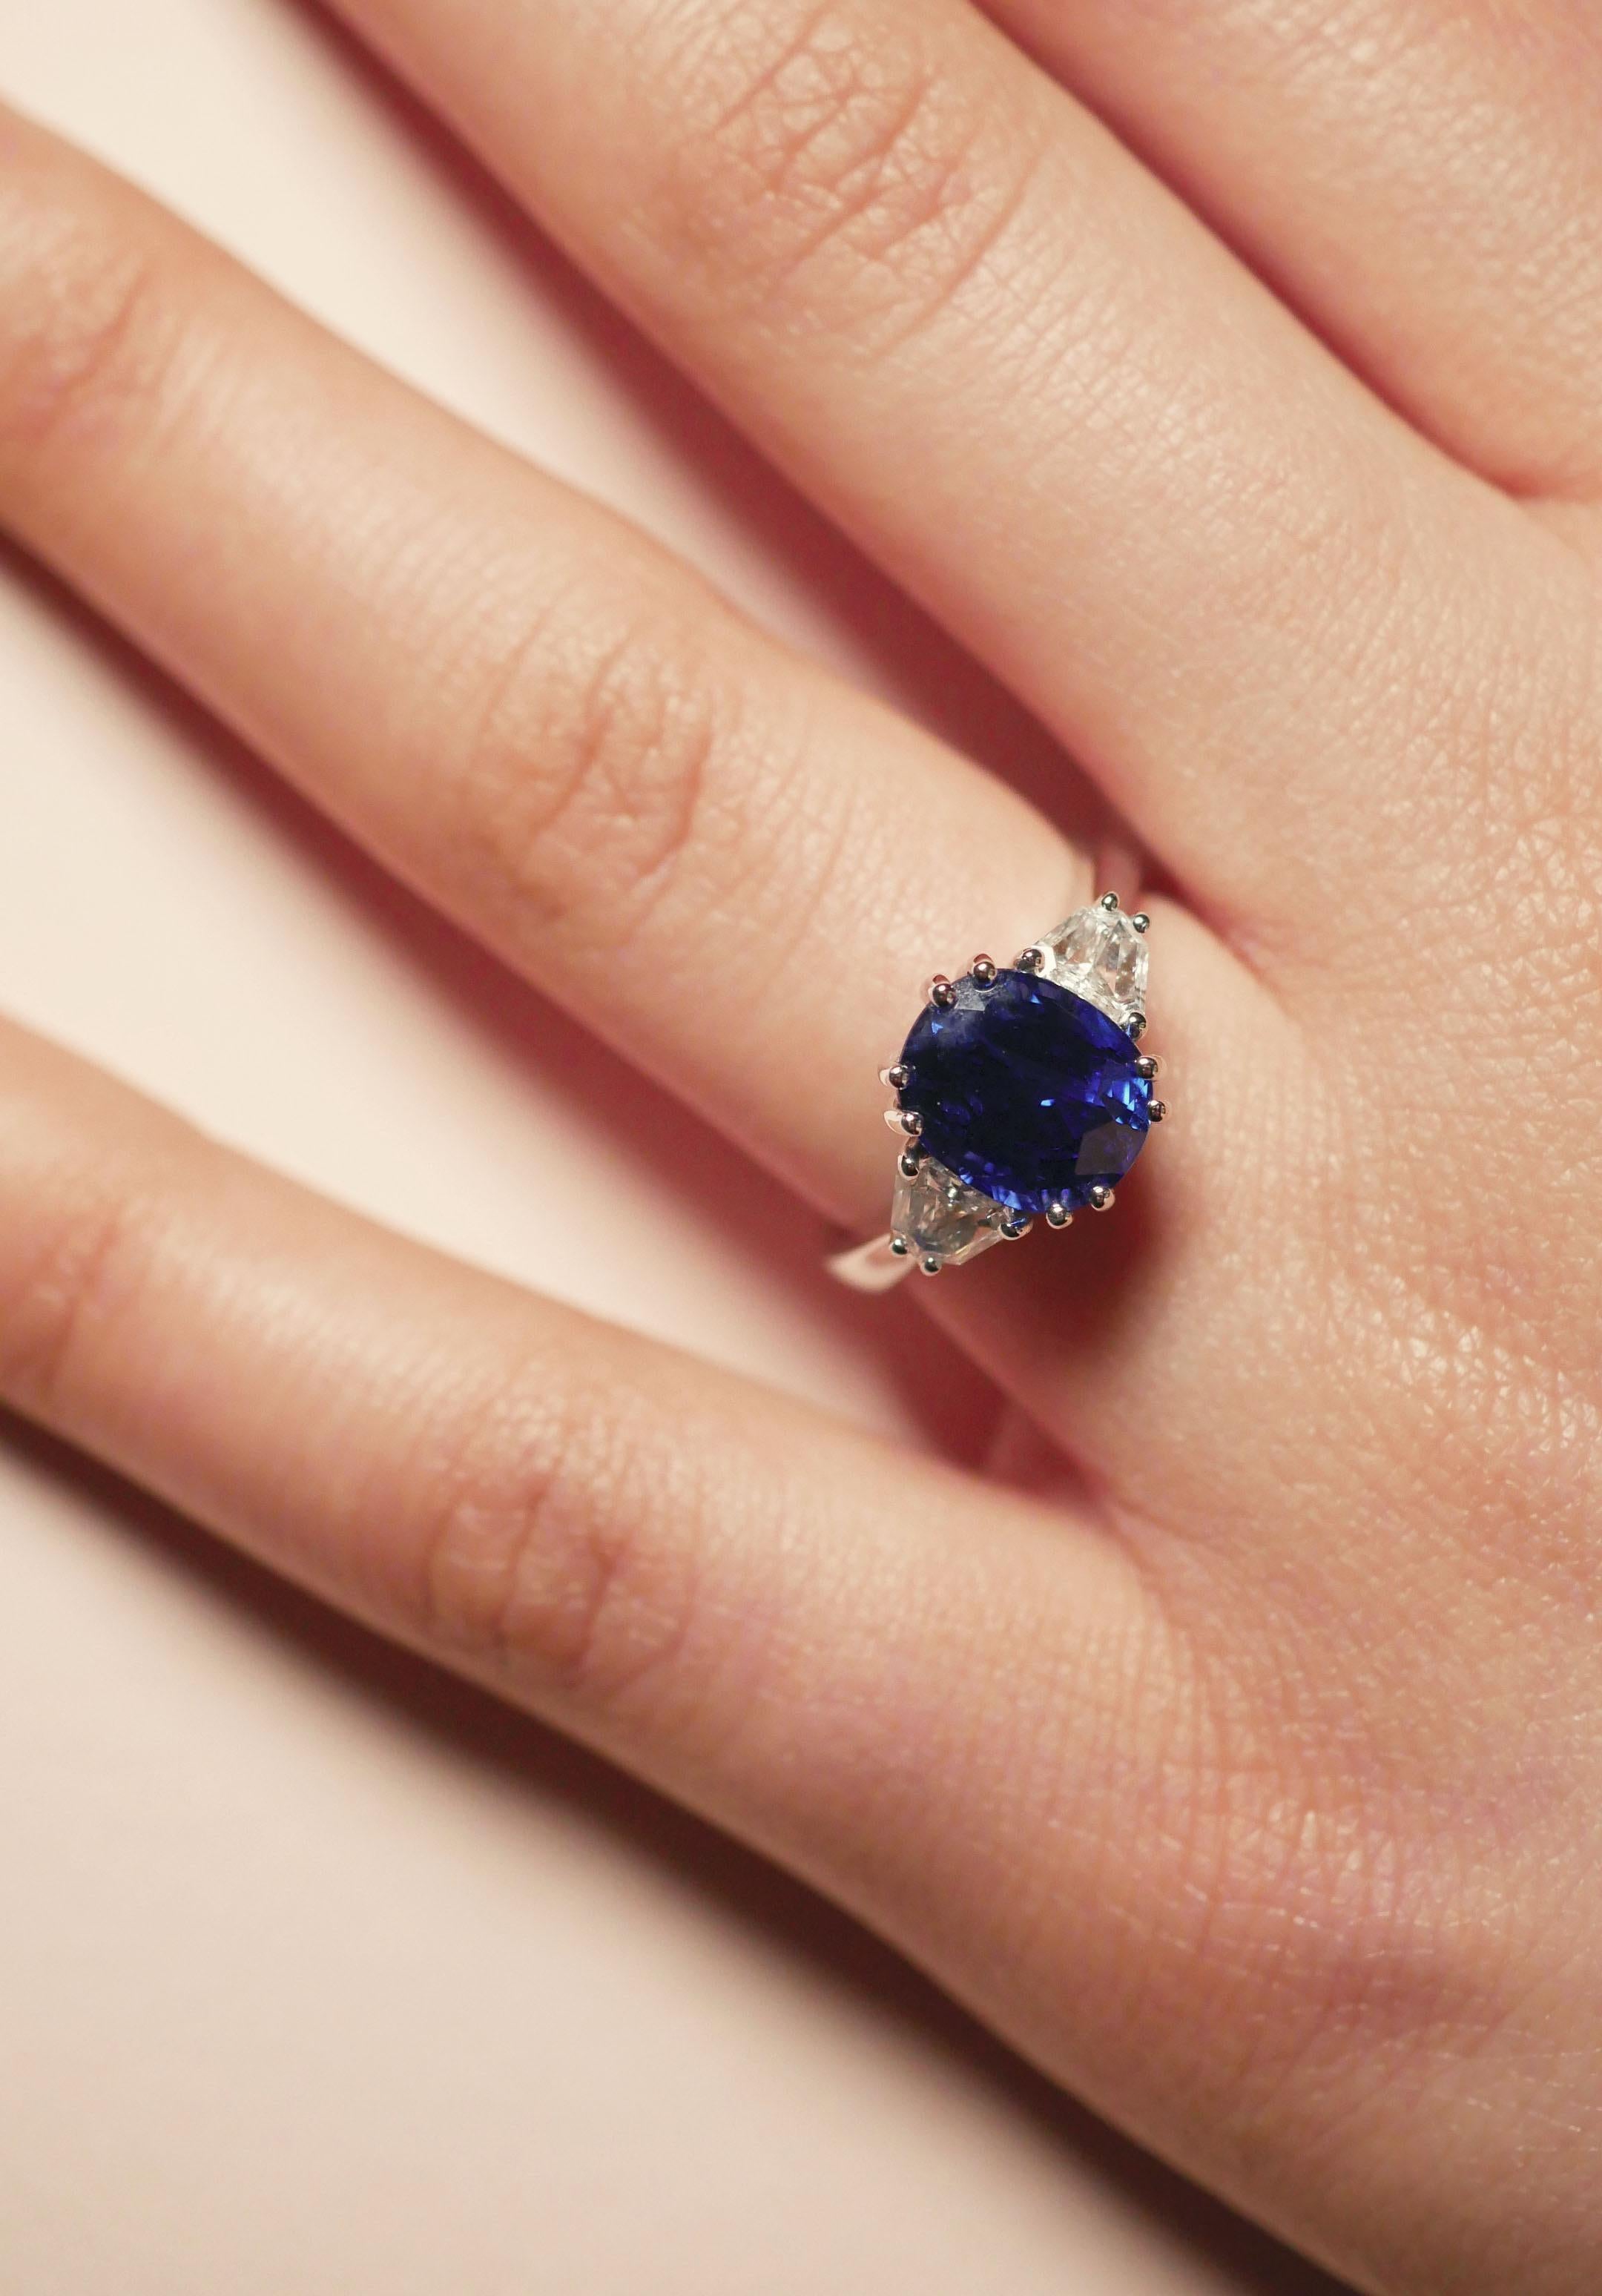 A sleek three-stone 18k white gold ring with a 4 carat deep blue sapphire at its centre beautifully set with four-double smooth claws, and two dazzling tapered diamond baguettes at each side.

Ring Size: UK - N, US - 7
0.48 Carat Diamonds